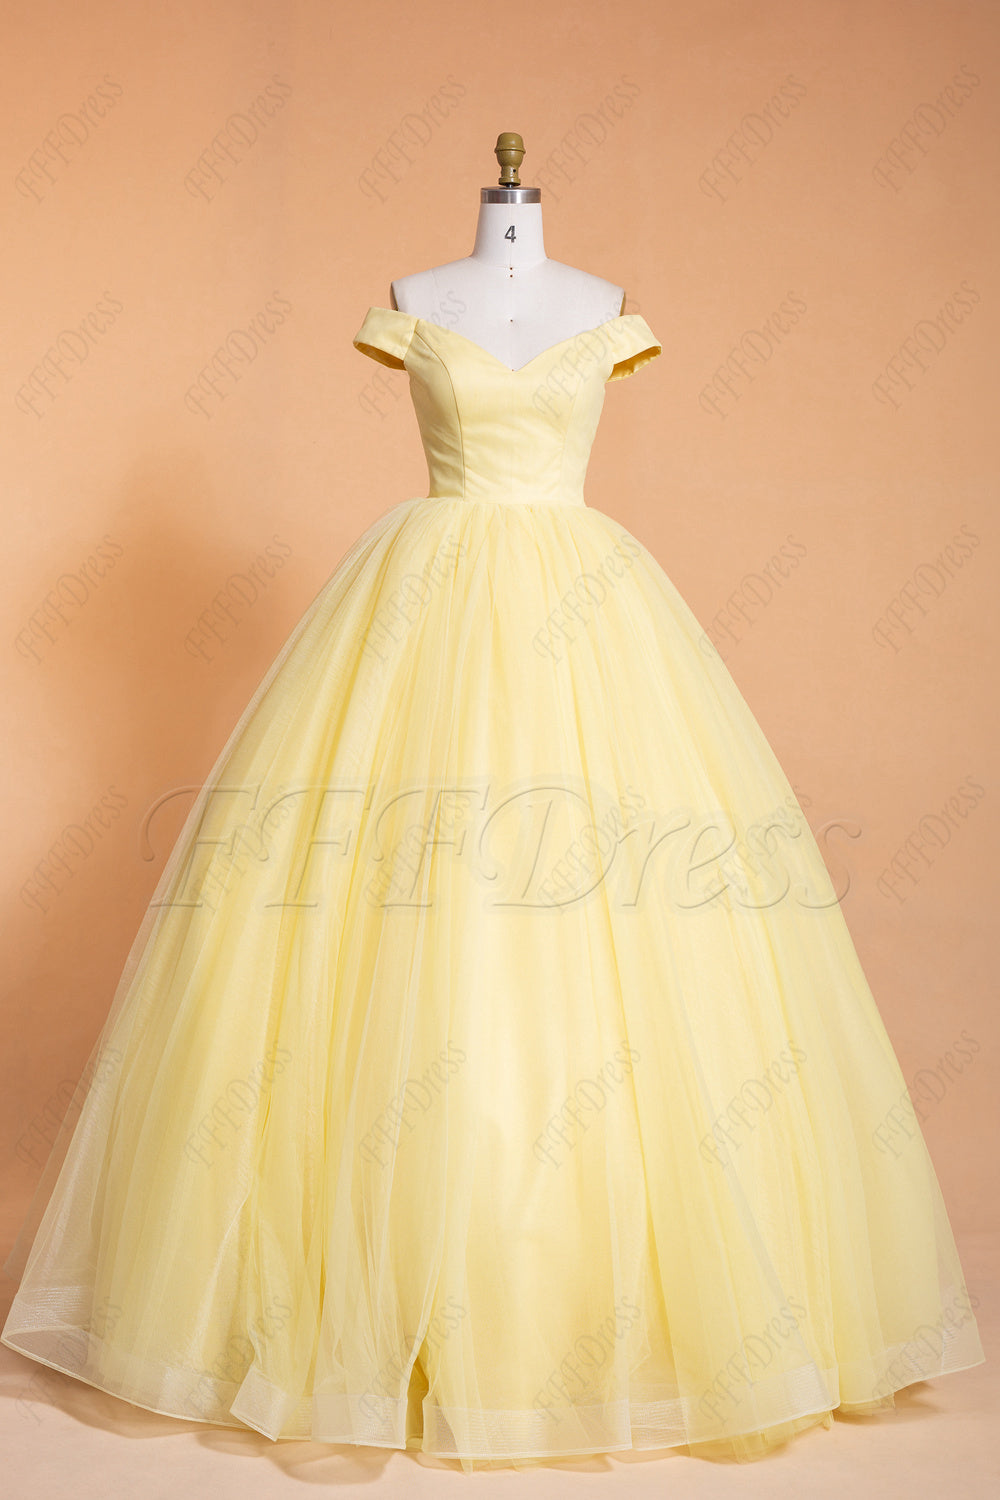 Off the shoulder yellow vintage ball gown prom dresses long